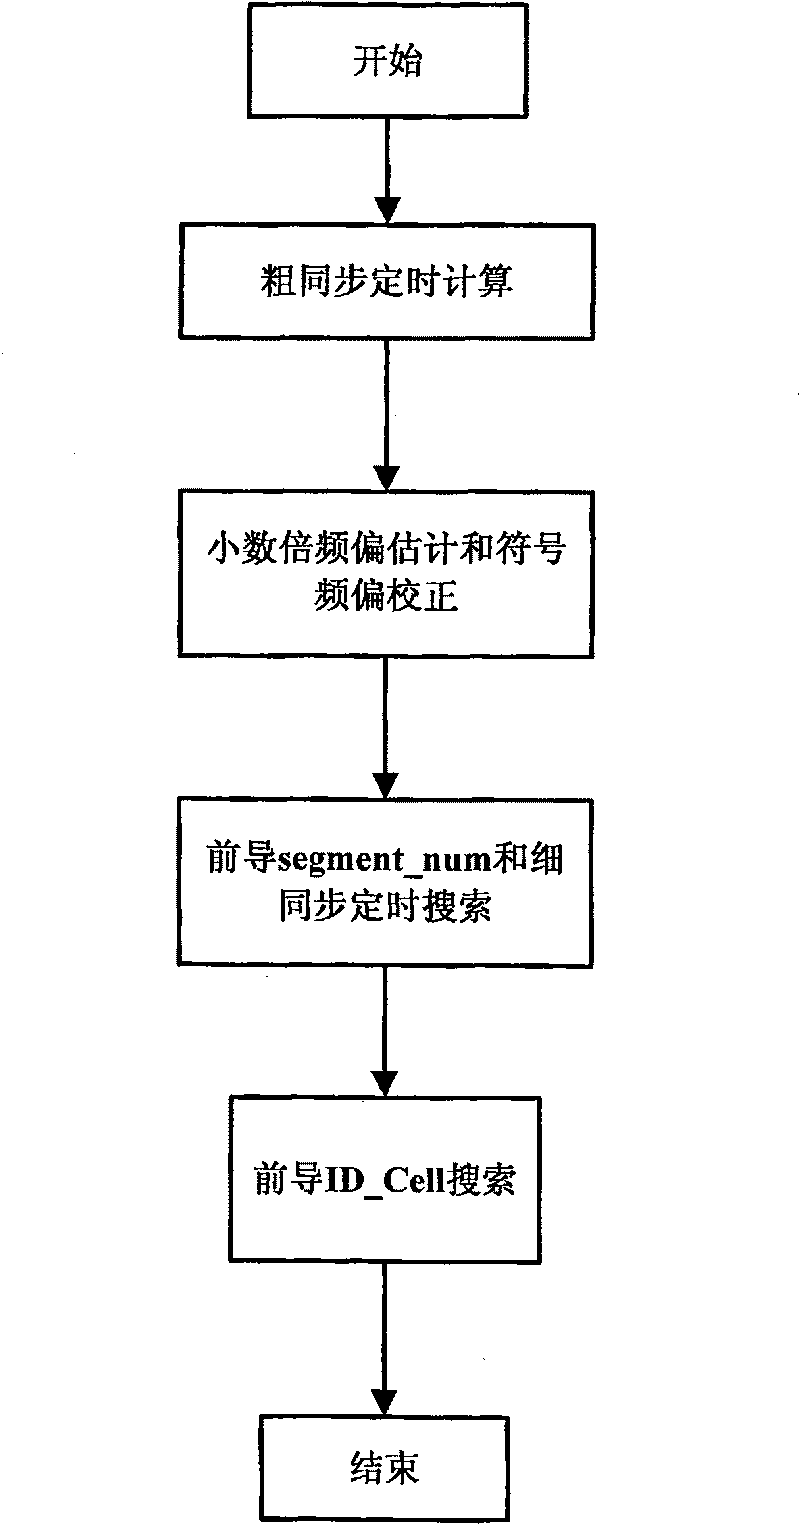 Lead code detecting method of subscriber station receiver